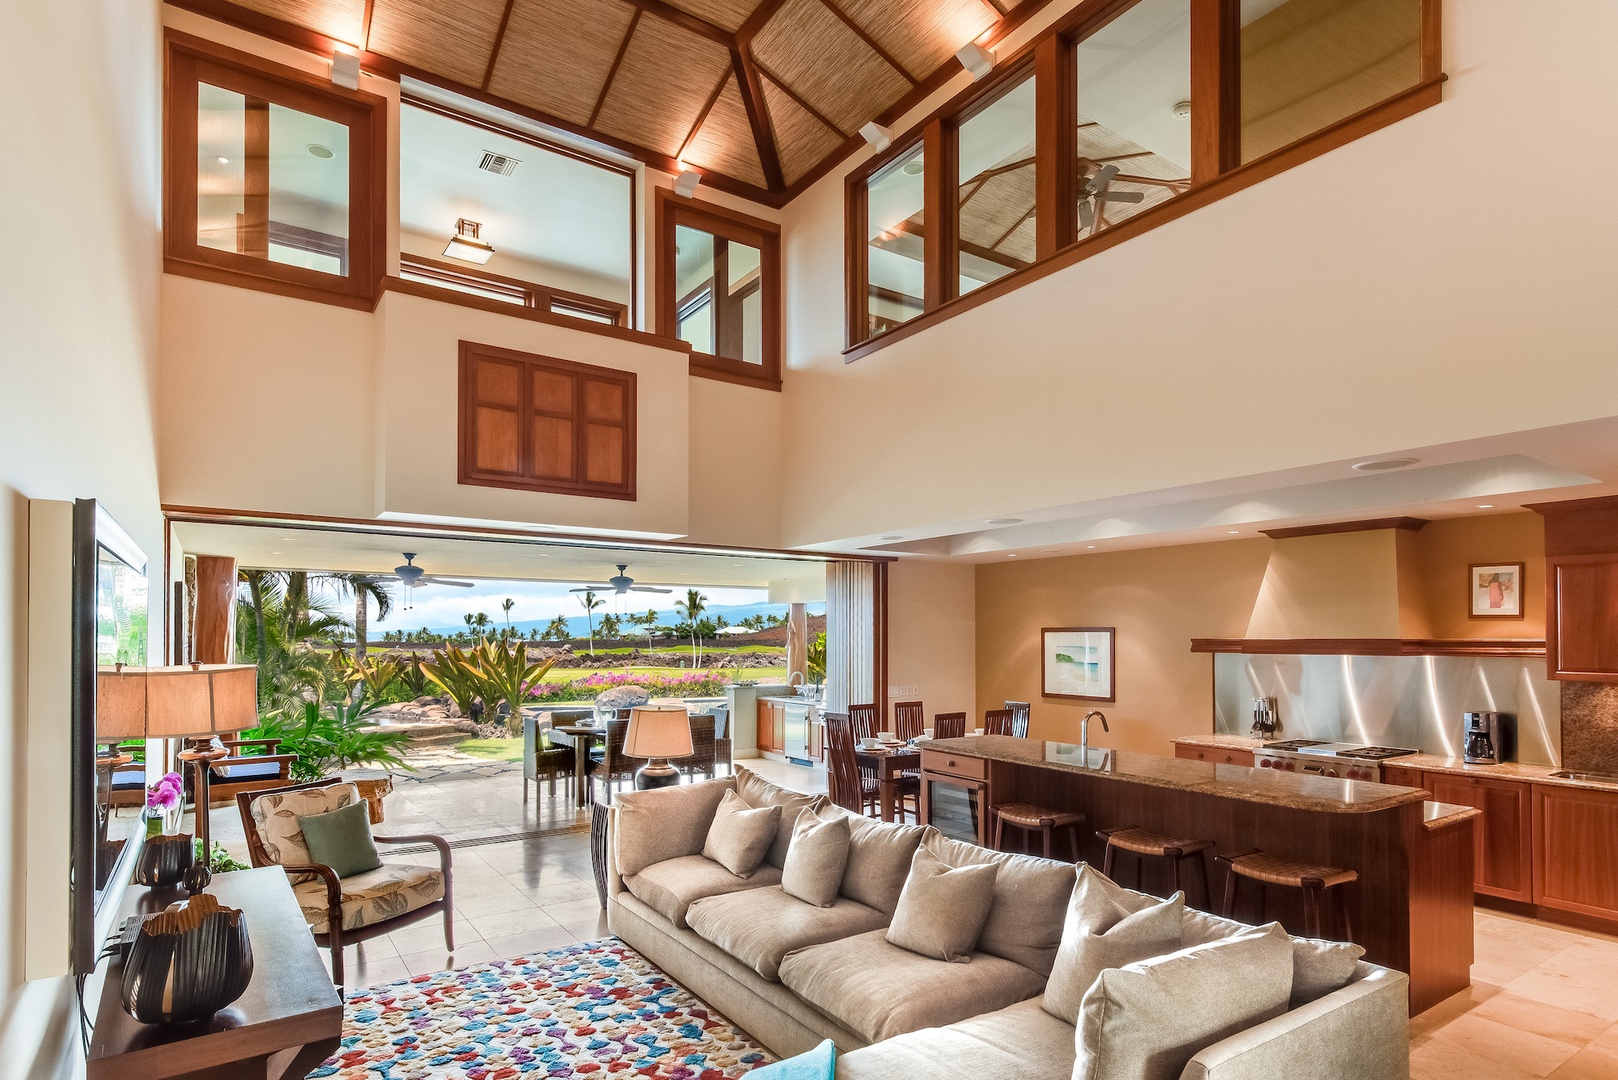 Kamuela Vacation Rentals, 3BD OneOcean (1C) at Mauna Lani Resort - Spacious & Elegantly Appointed Living Room w/ Vaulted Ceilings & Electronic Pocket Doors that Open to Lanai and Pool Area